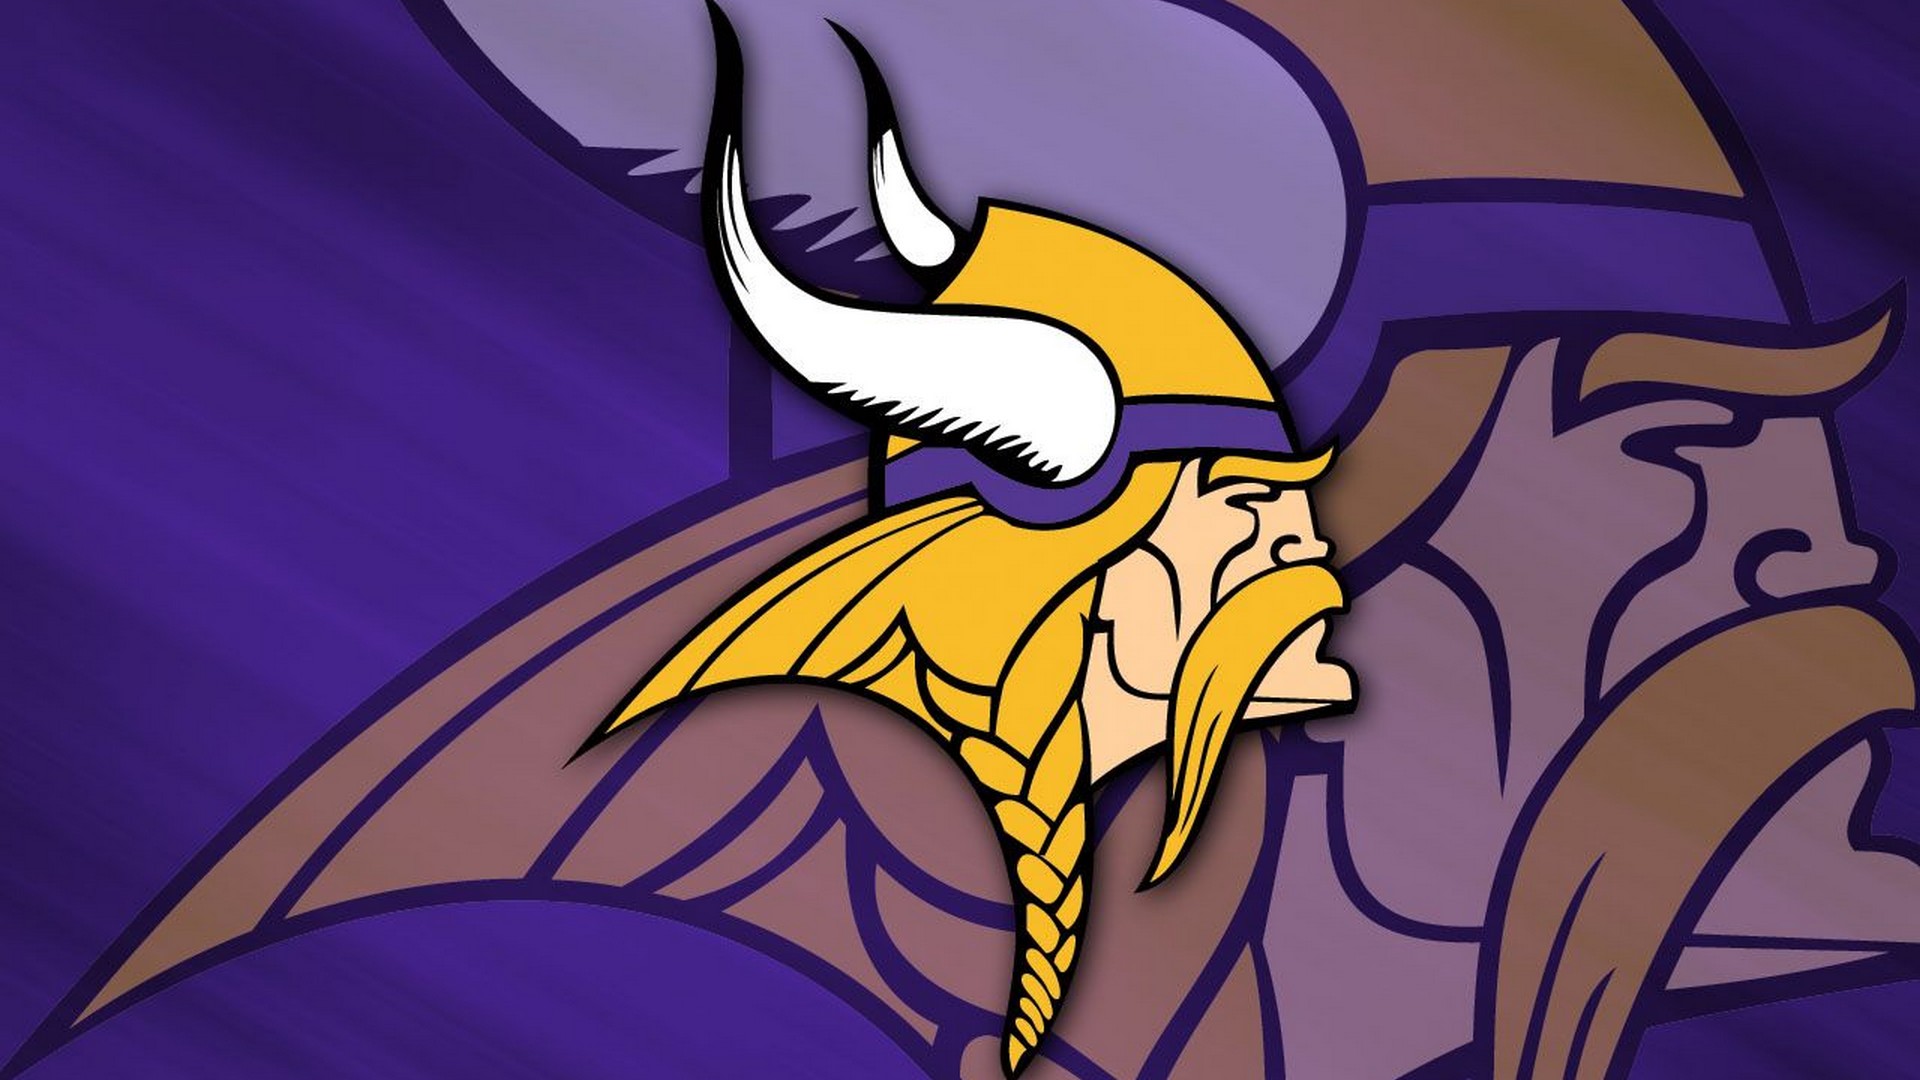 Backgrounds Minnesota Vikings HD With Resolution 1920X1080 pixel. You can make this wallpaper for your Mac or Windows Desktop Background, iPhone, Android or Tablet and another Smartphone device for free